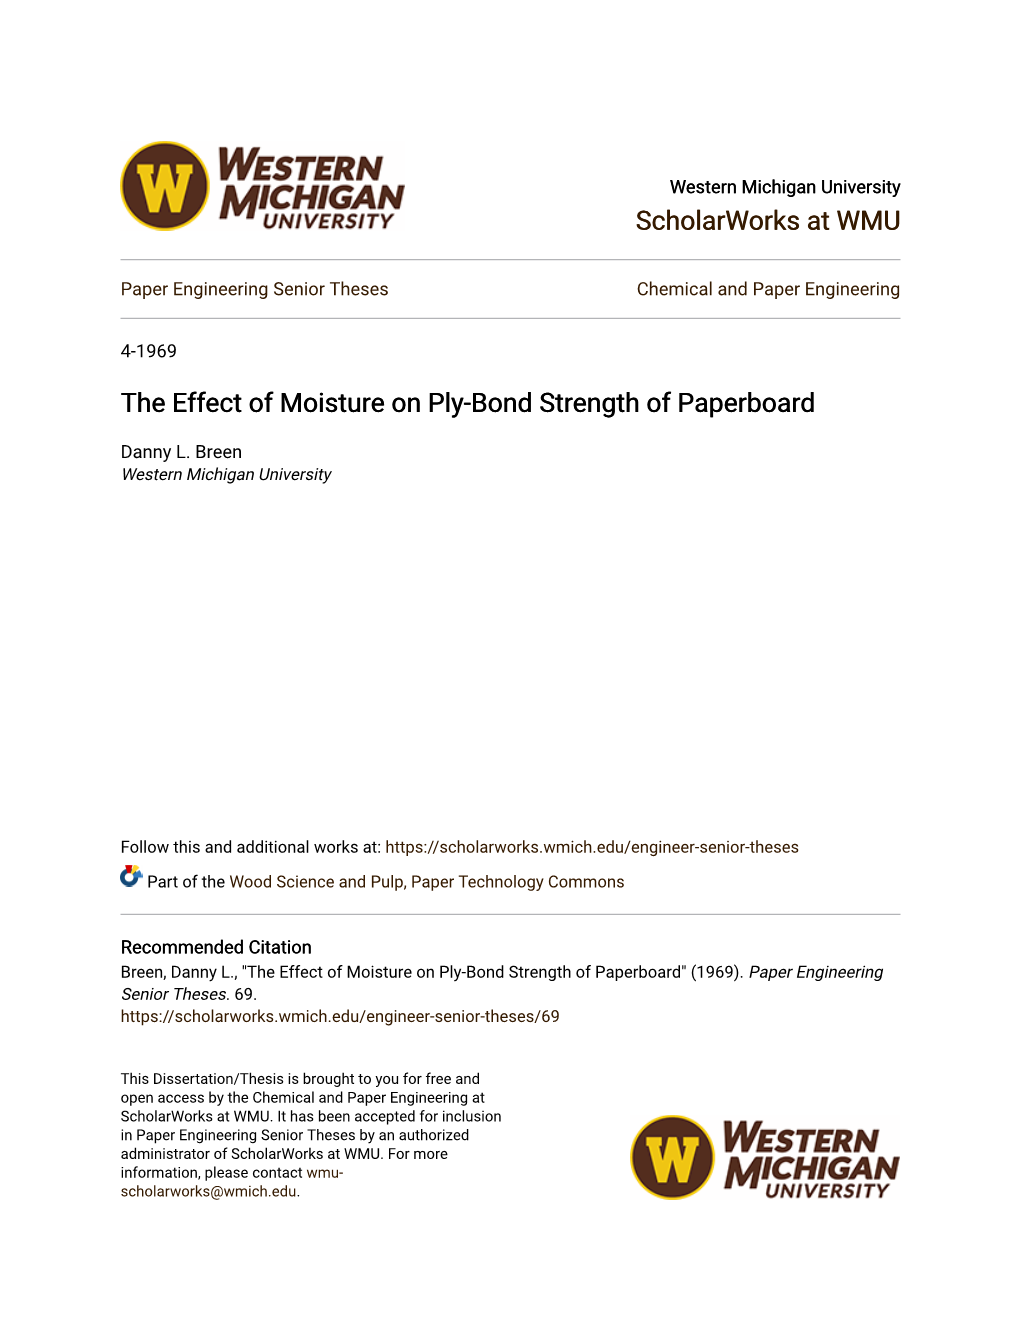 The Effect of Moisture on Ply-Bond Strength of Paperboard